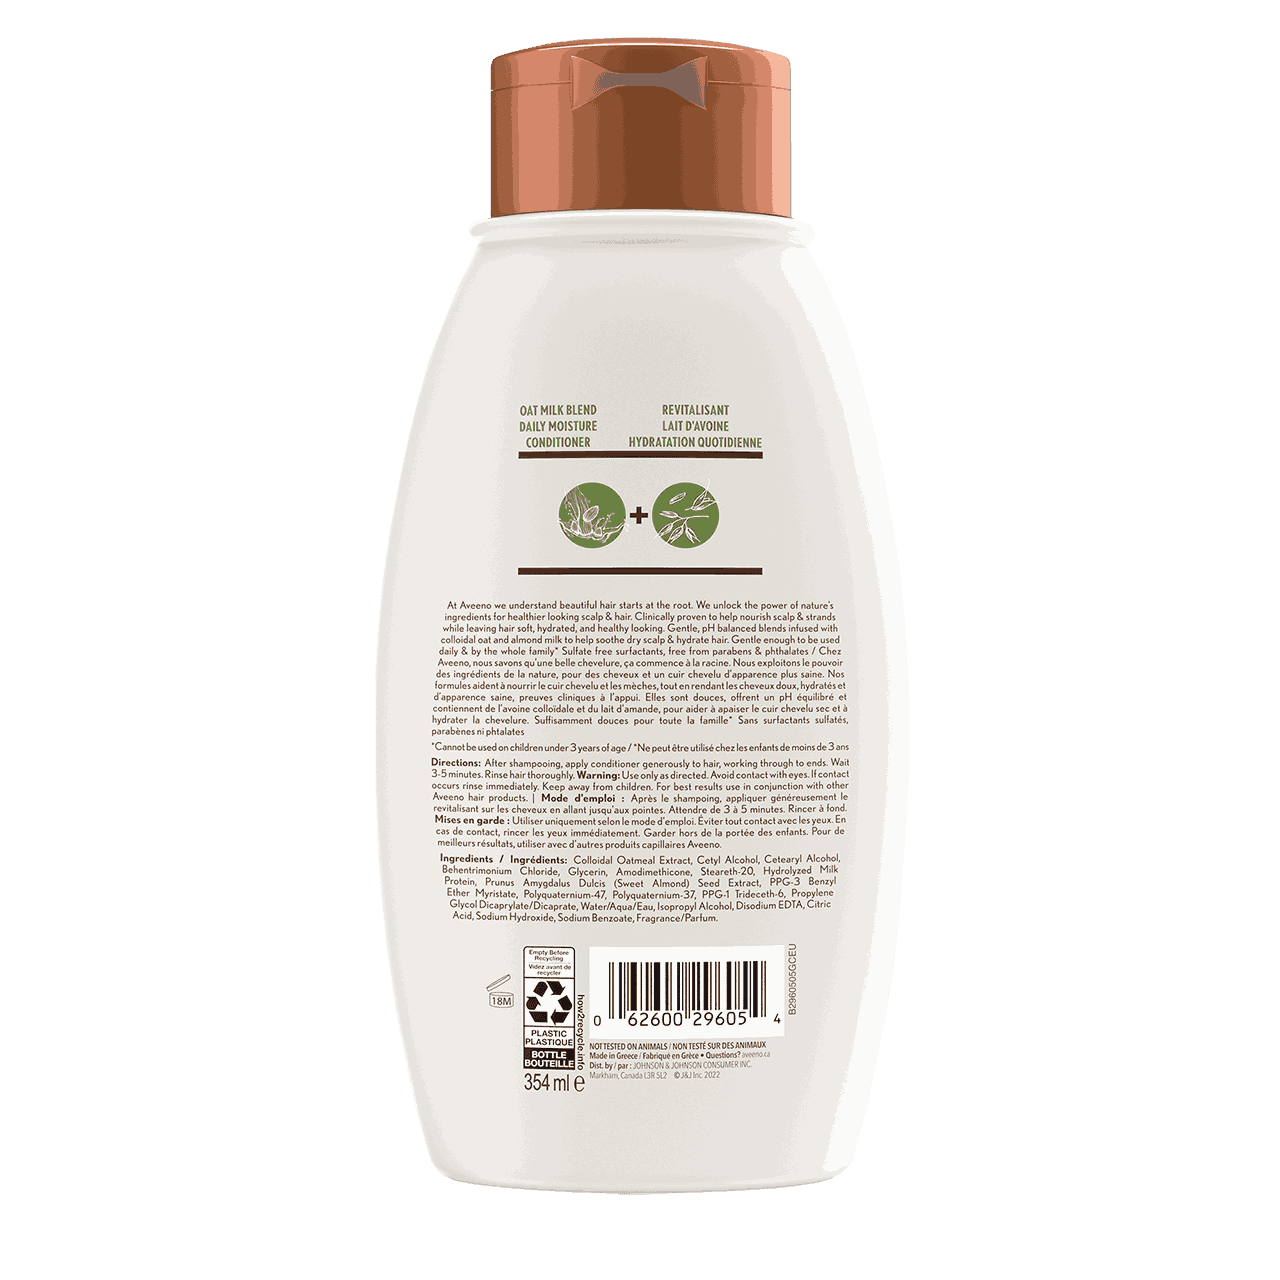 AVEENO® Oatmik Blend Conditioner Squeeze Bottle, 354ml, back label